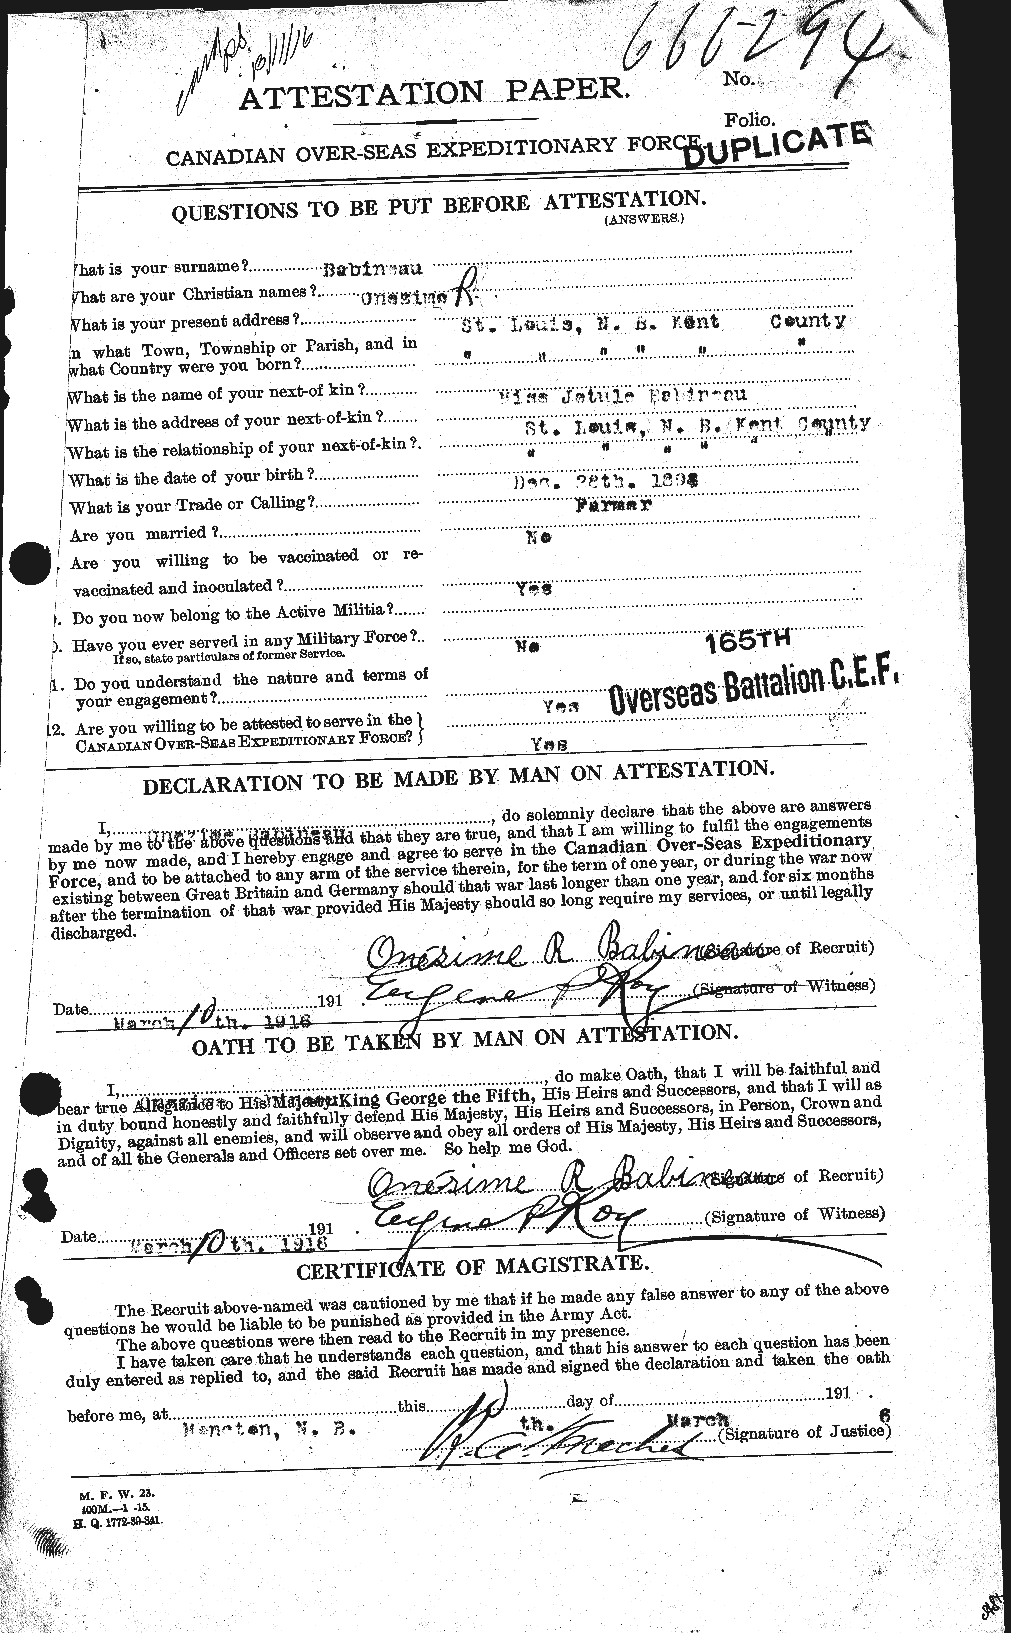 Personnel Records of the First World War - CEF 216007a